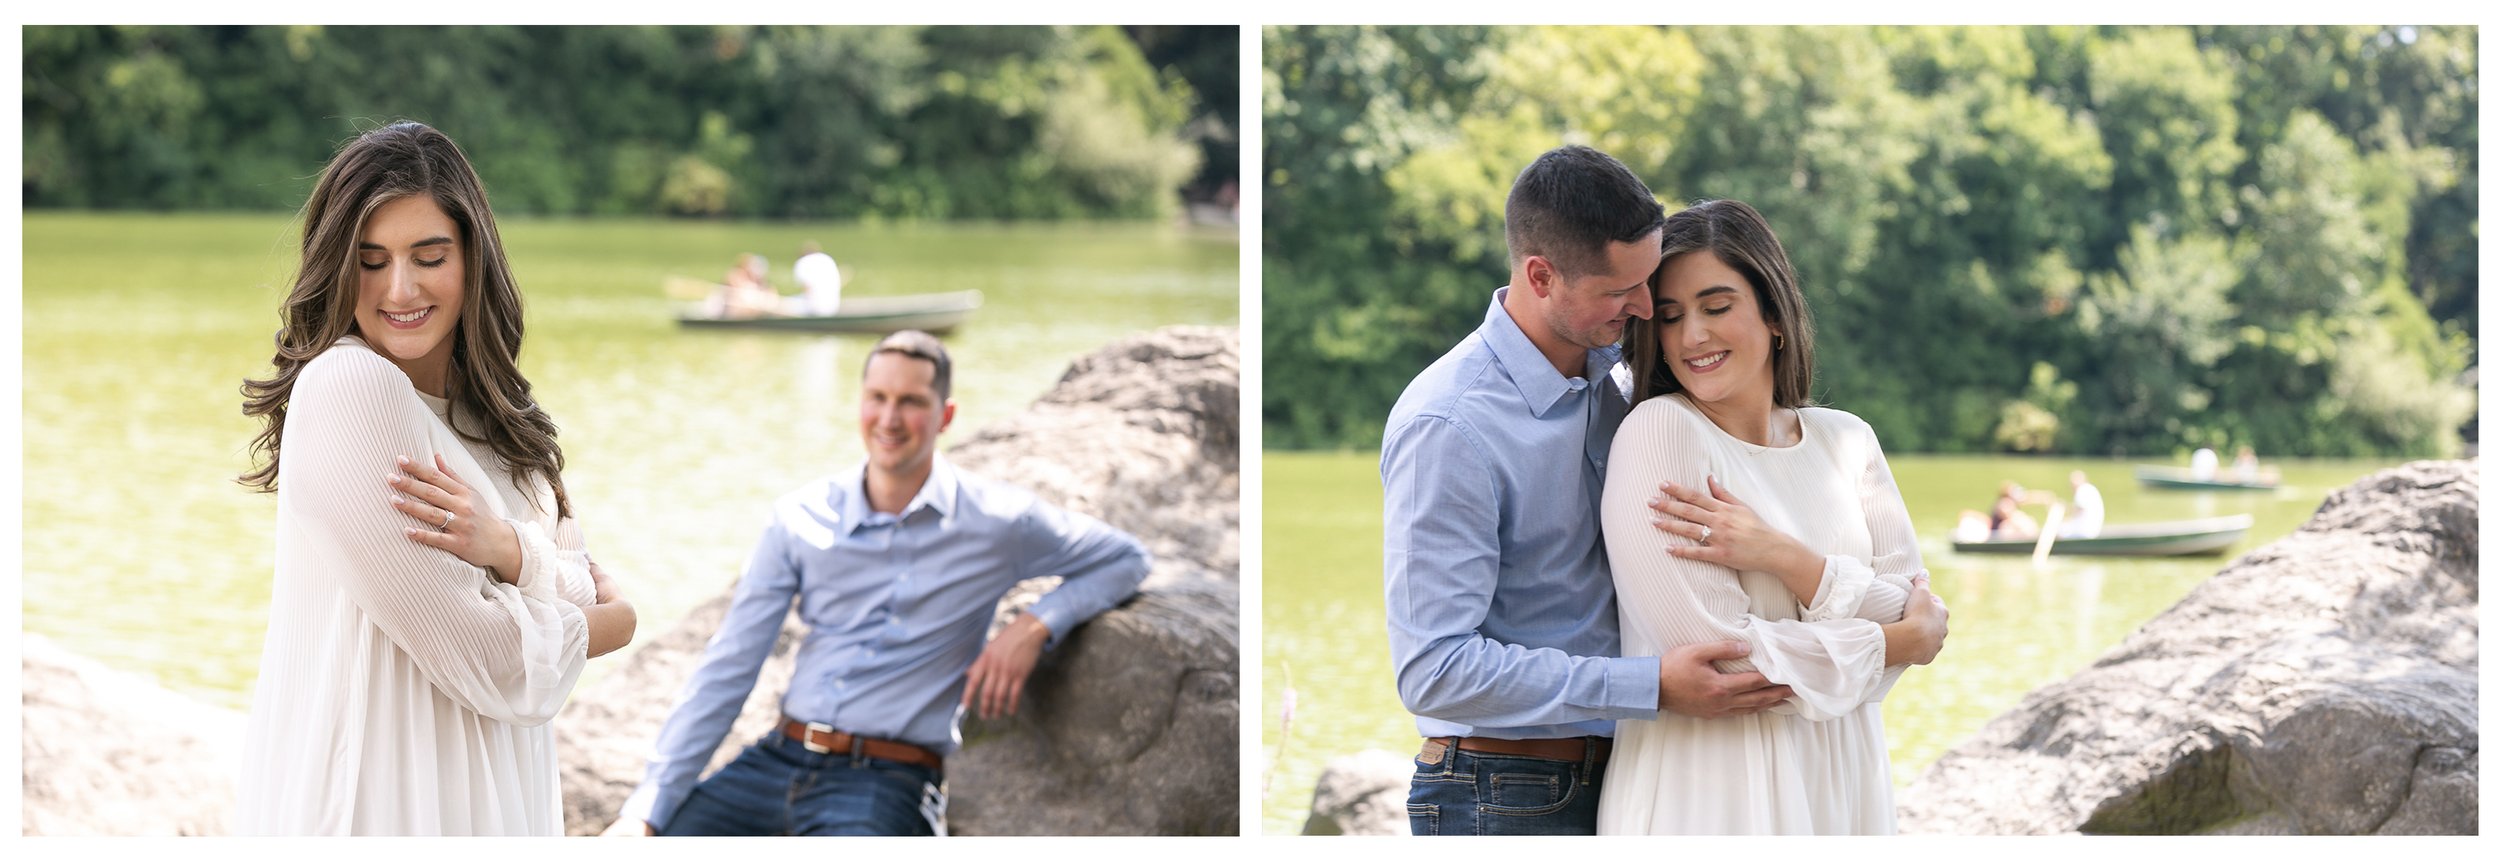 Central Park Engagement Photographer nyc _ 0006.jpg